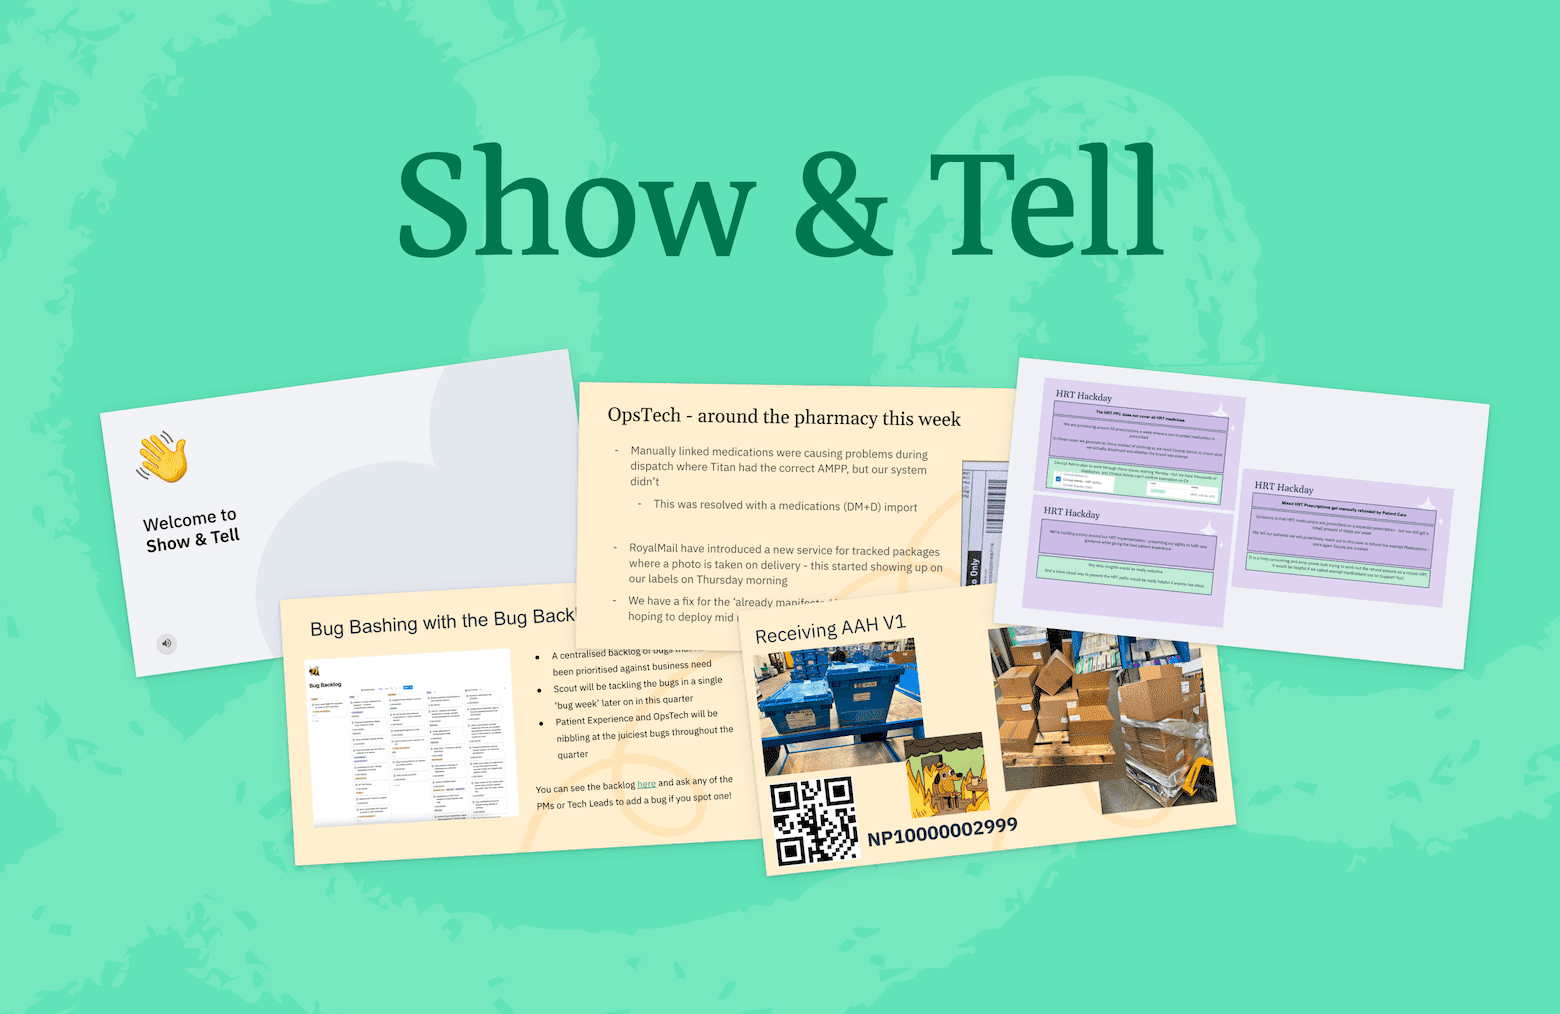 Why we show and tell